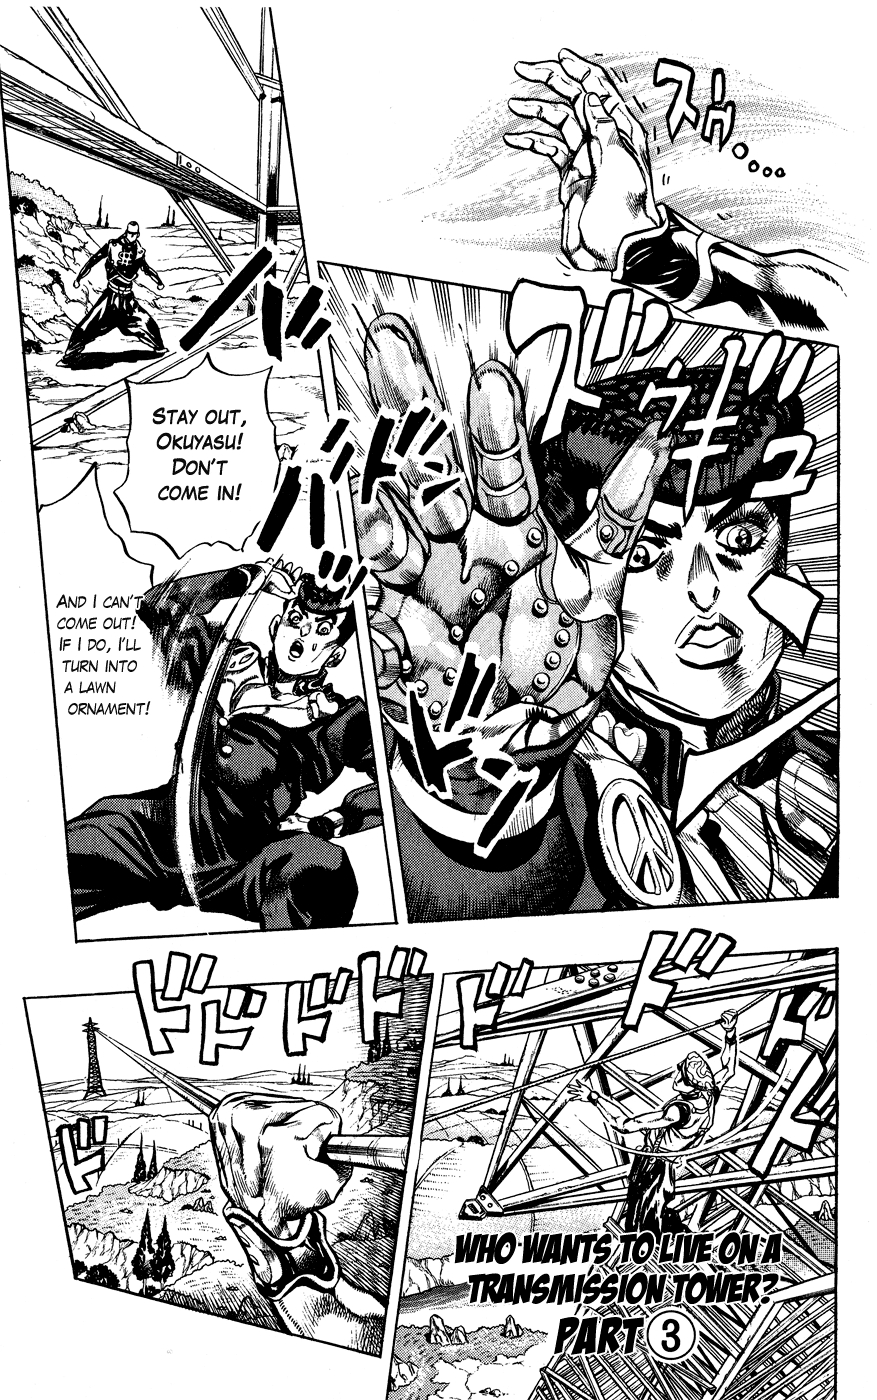 JoJo's Bizarre Adventure Part 4 Diamond is Unbreakable Vol. 15 Ch. 135 Who Wants to Live on a Transmission Tower? Part 3